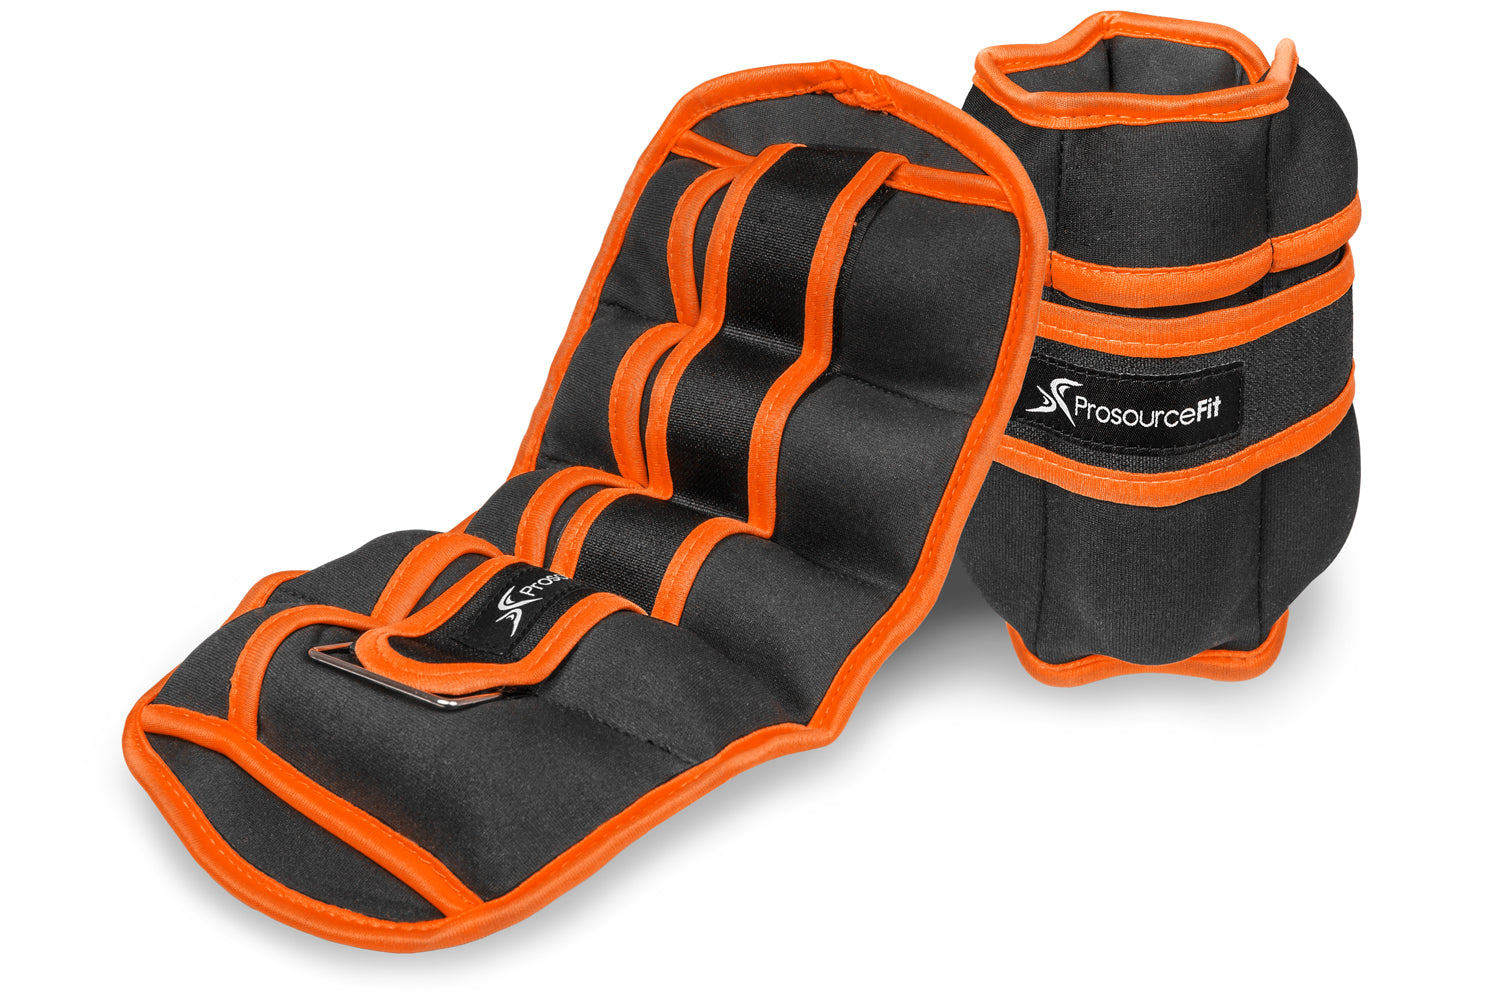 Holyfire Adjustable Ankle Weights, Wrist & Ankle Weights for Home